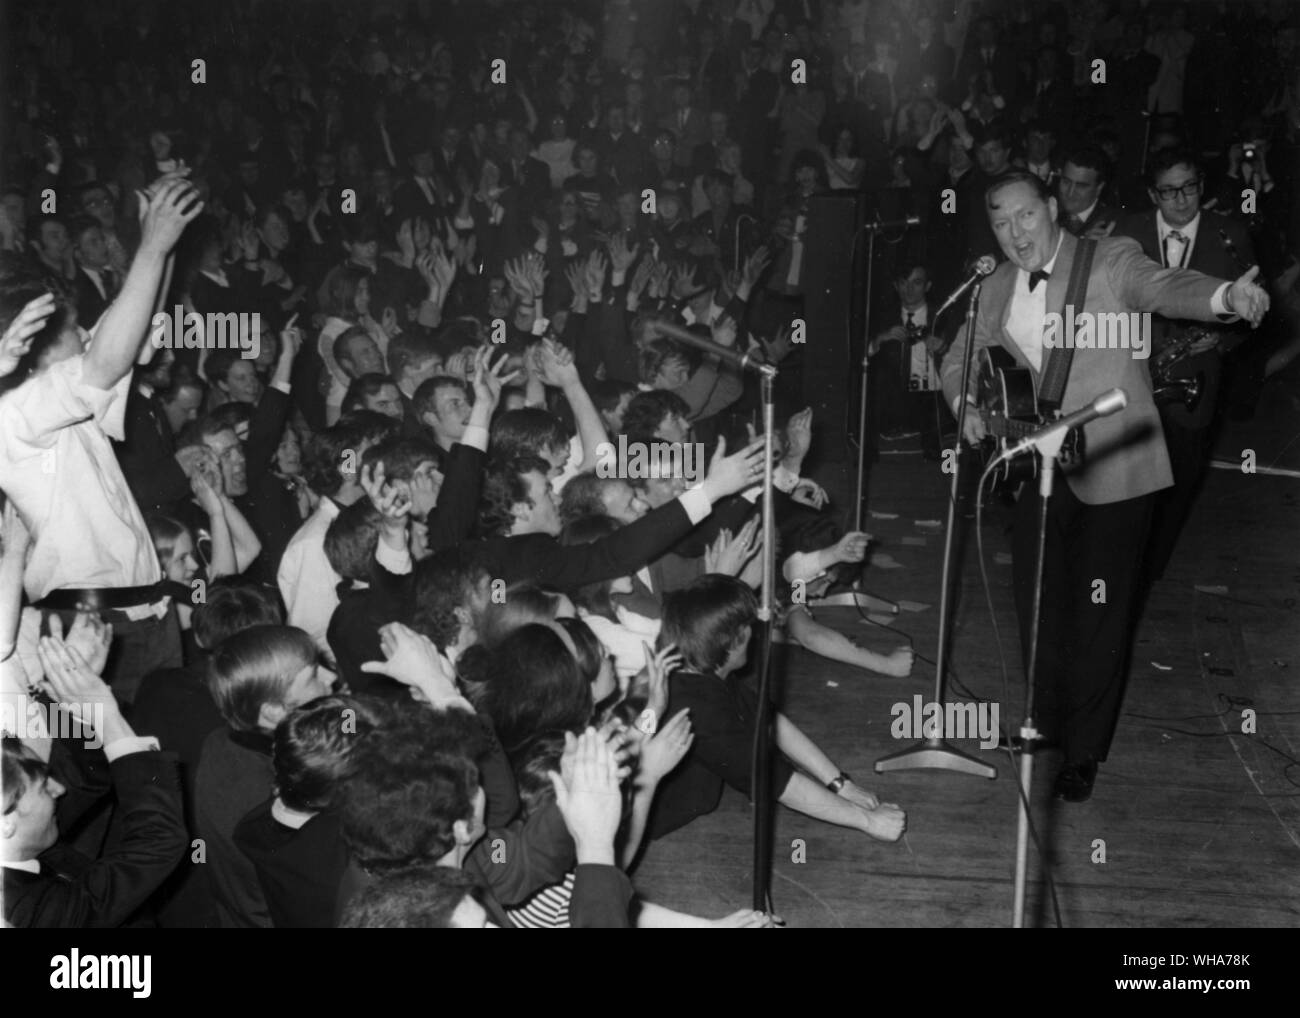 Fans crowd the stage at the Royal Albert Hall May 1st as US rock and roll entertainer Bill Haley introduces his group The Comets at the start of the performance. 1st May 1968 Stock Photo